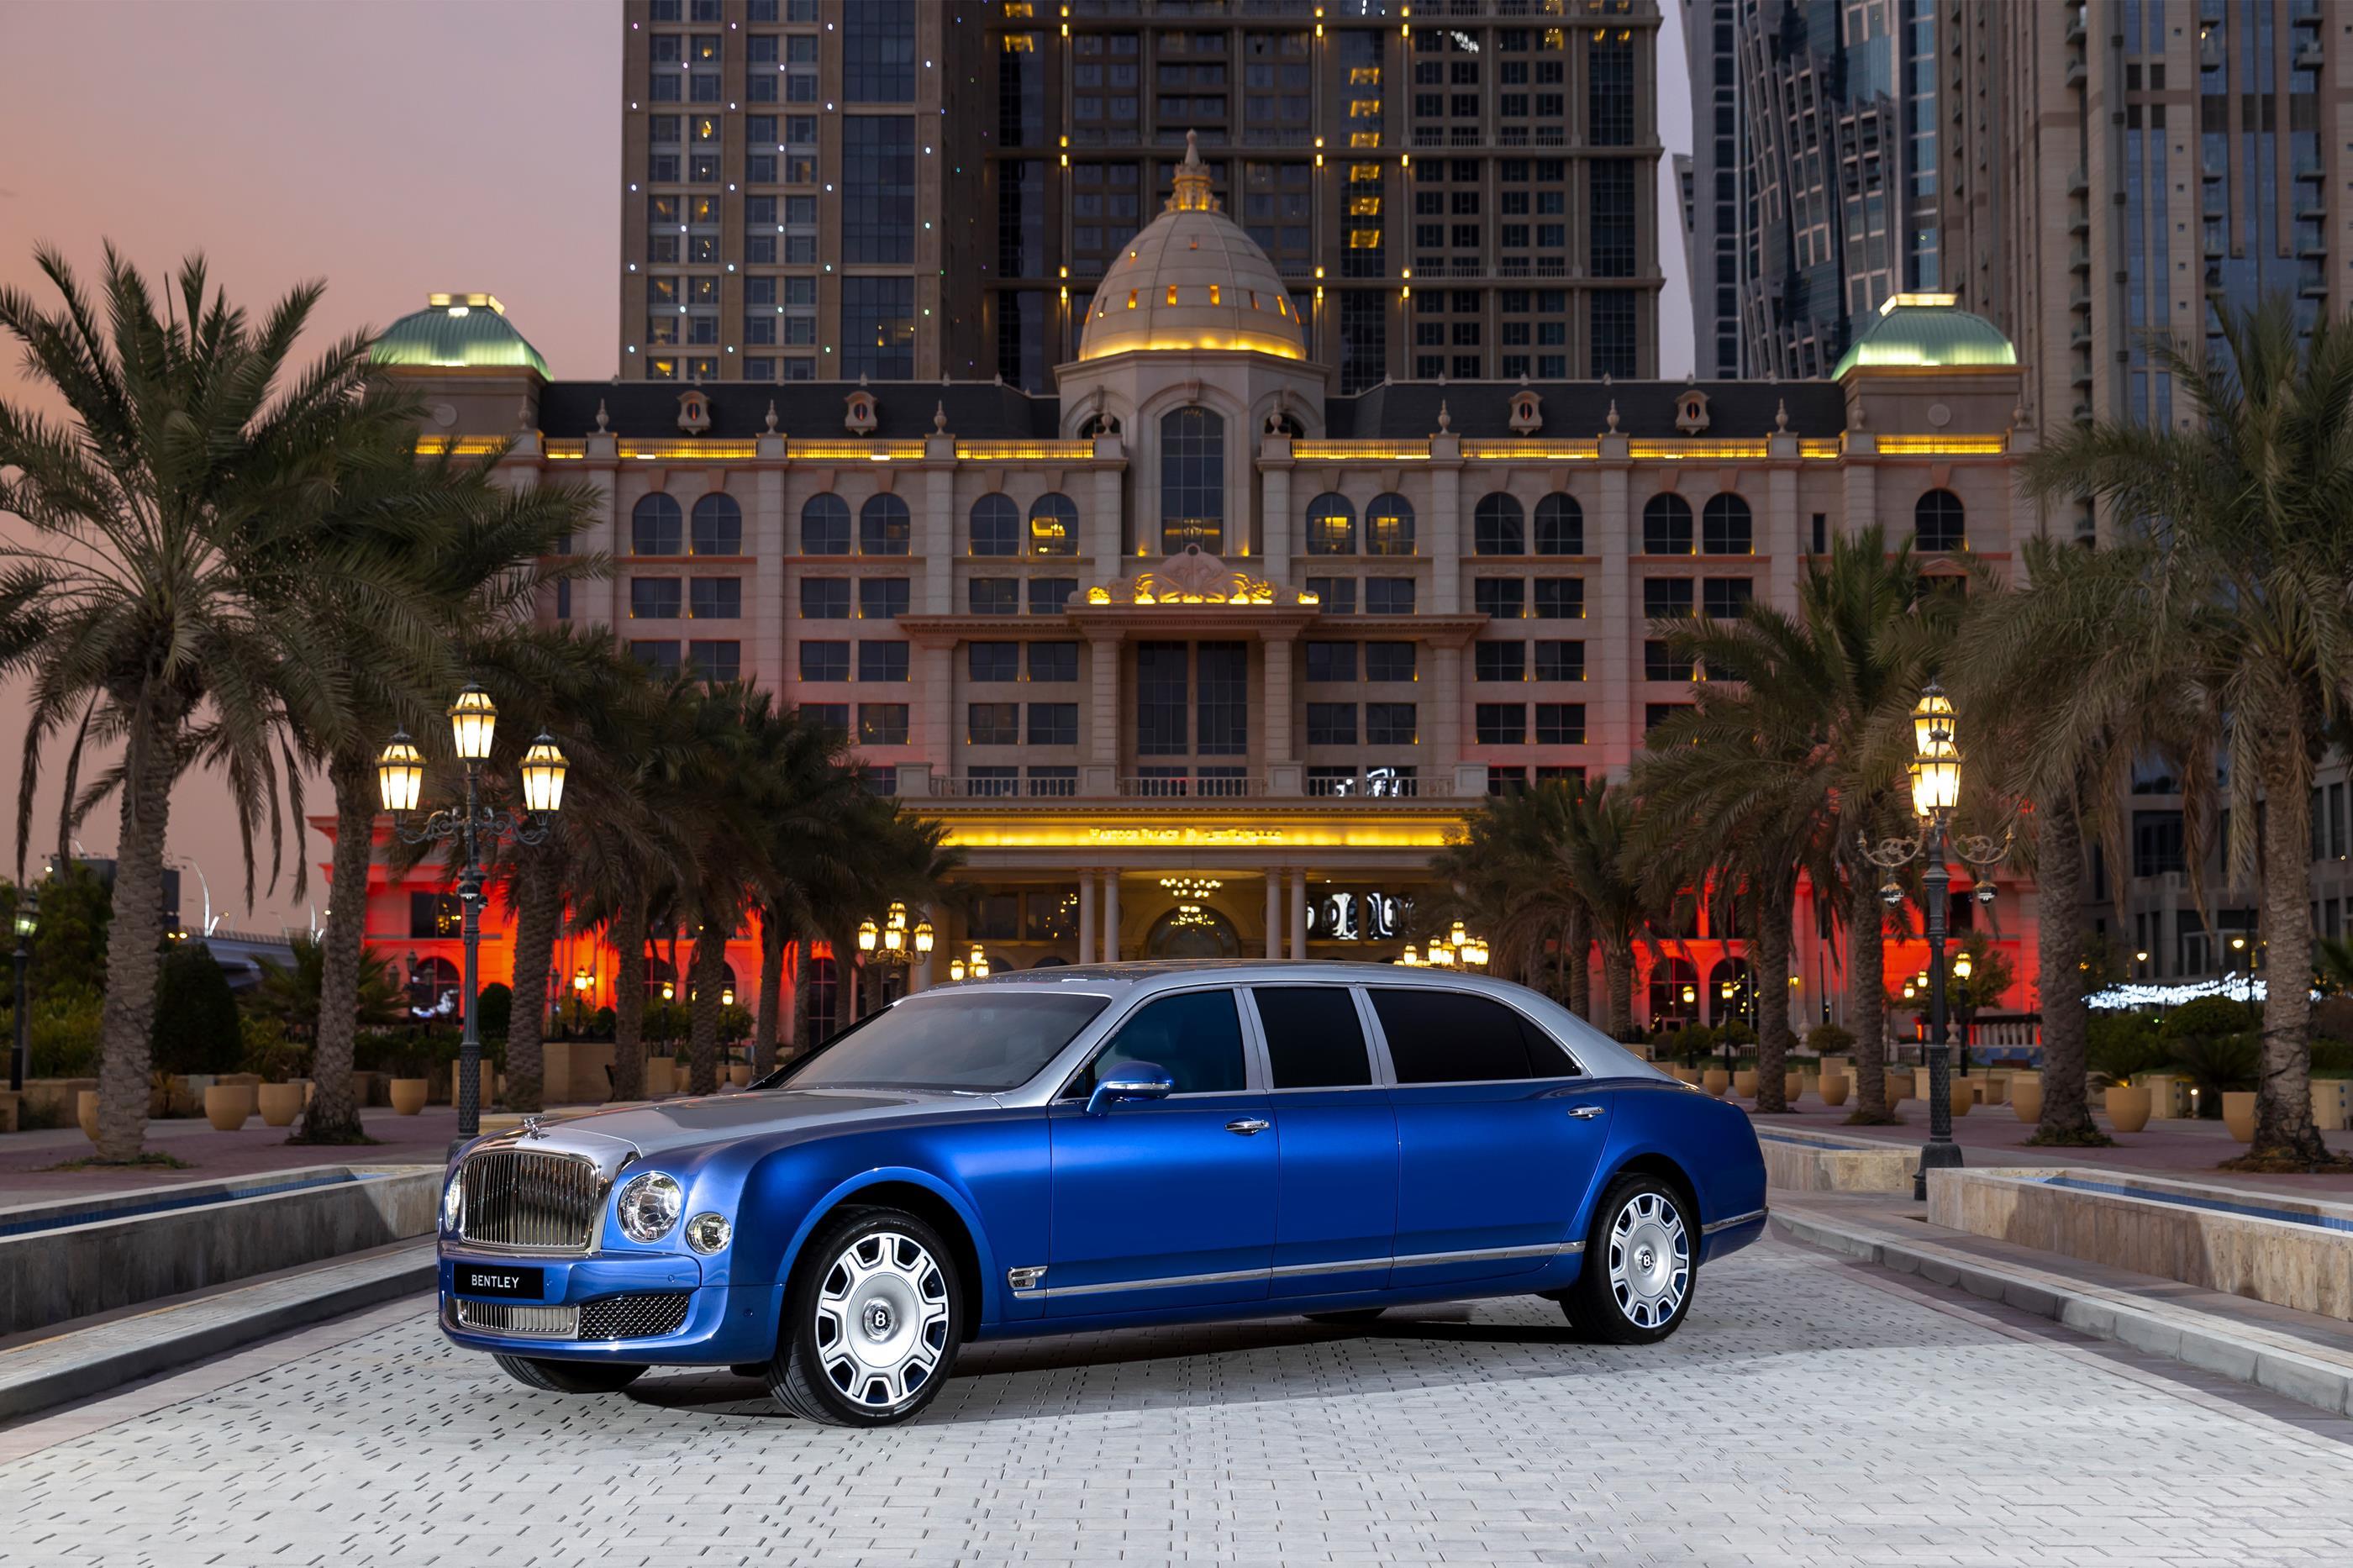 Bentley offers meticulous customizations for their luxury vehicles.